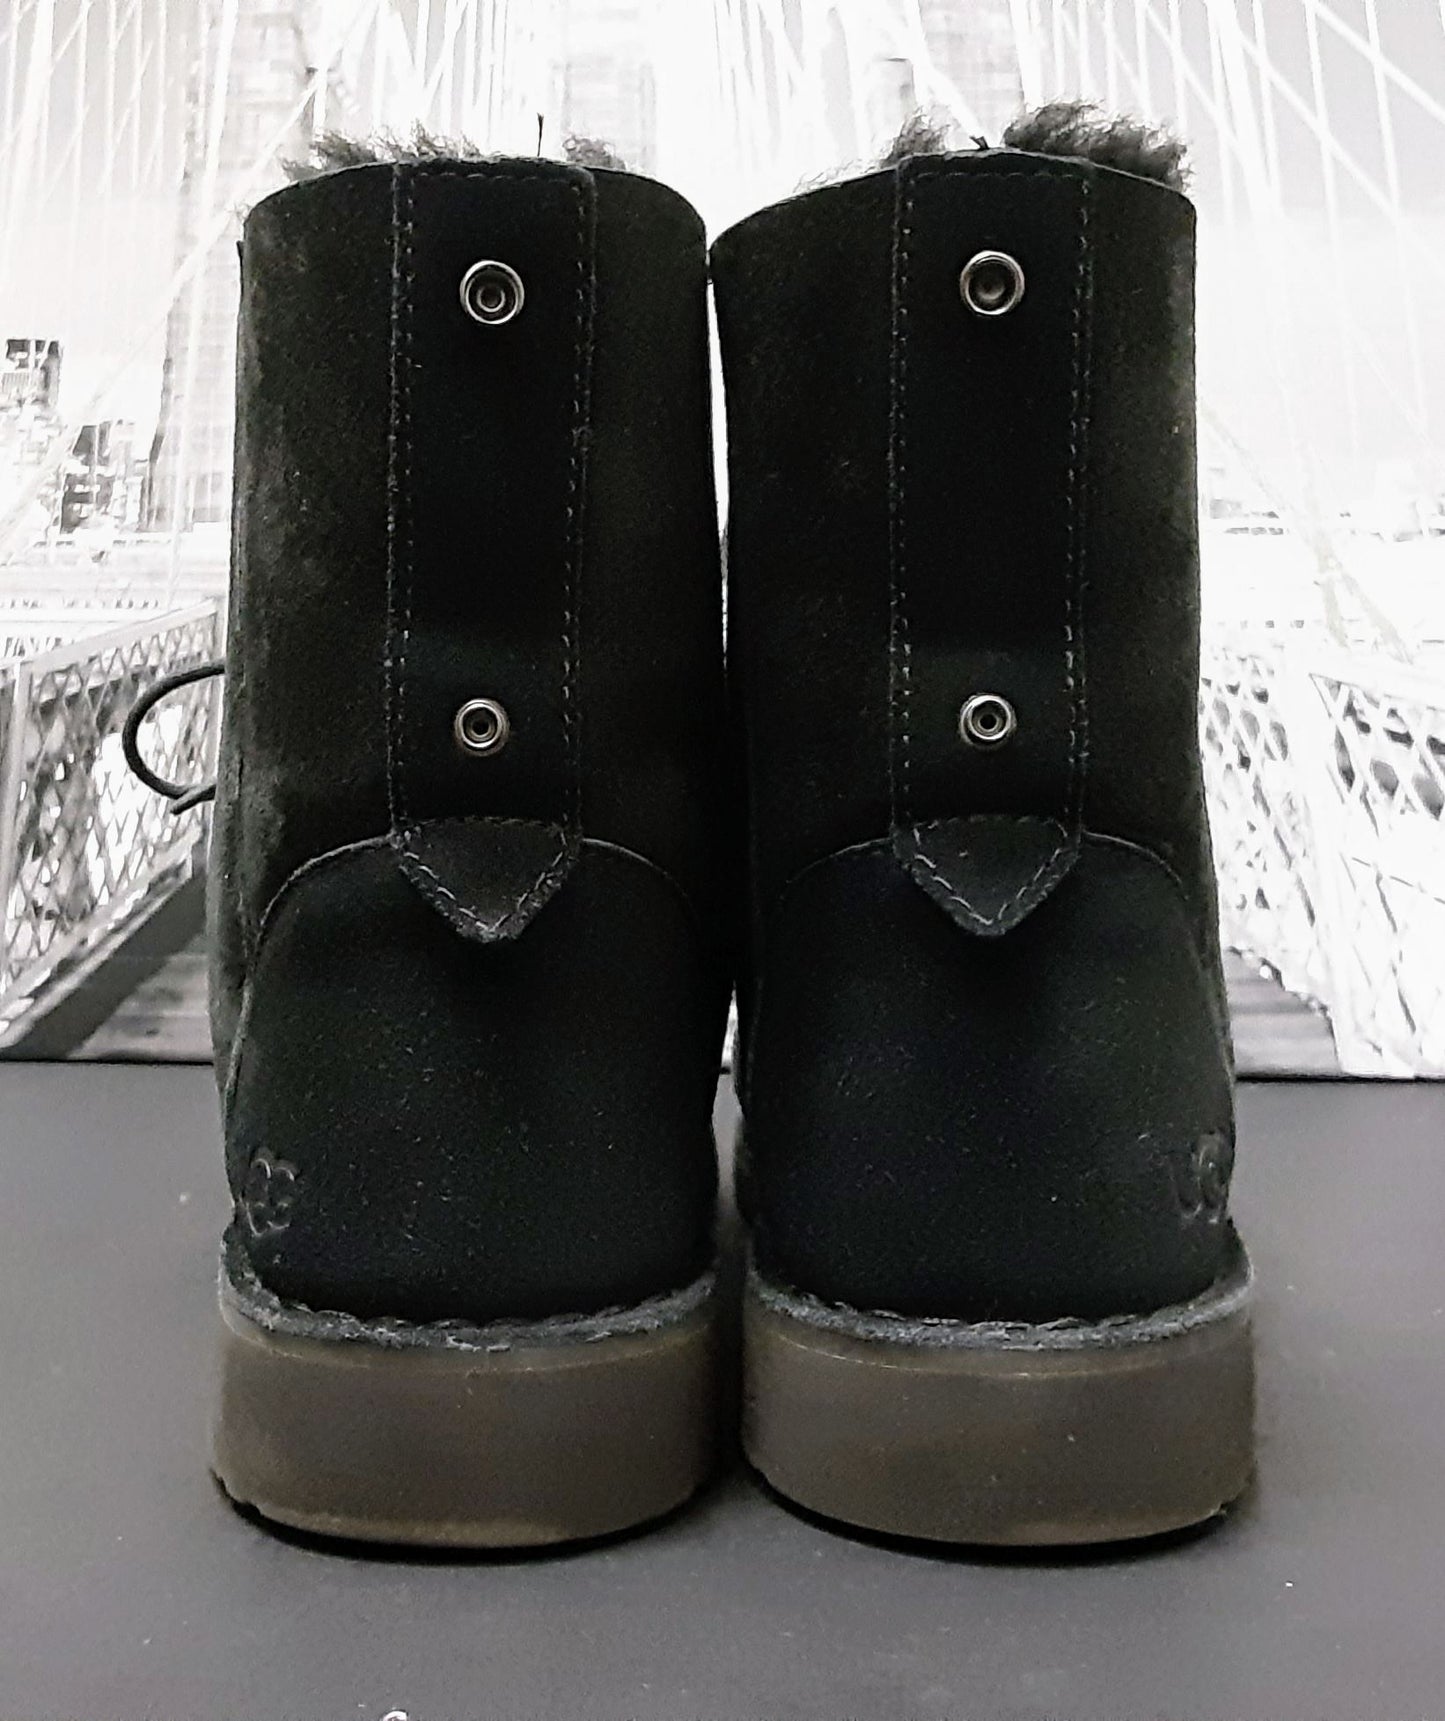 Ugg Black Suede Boots size 5.5